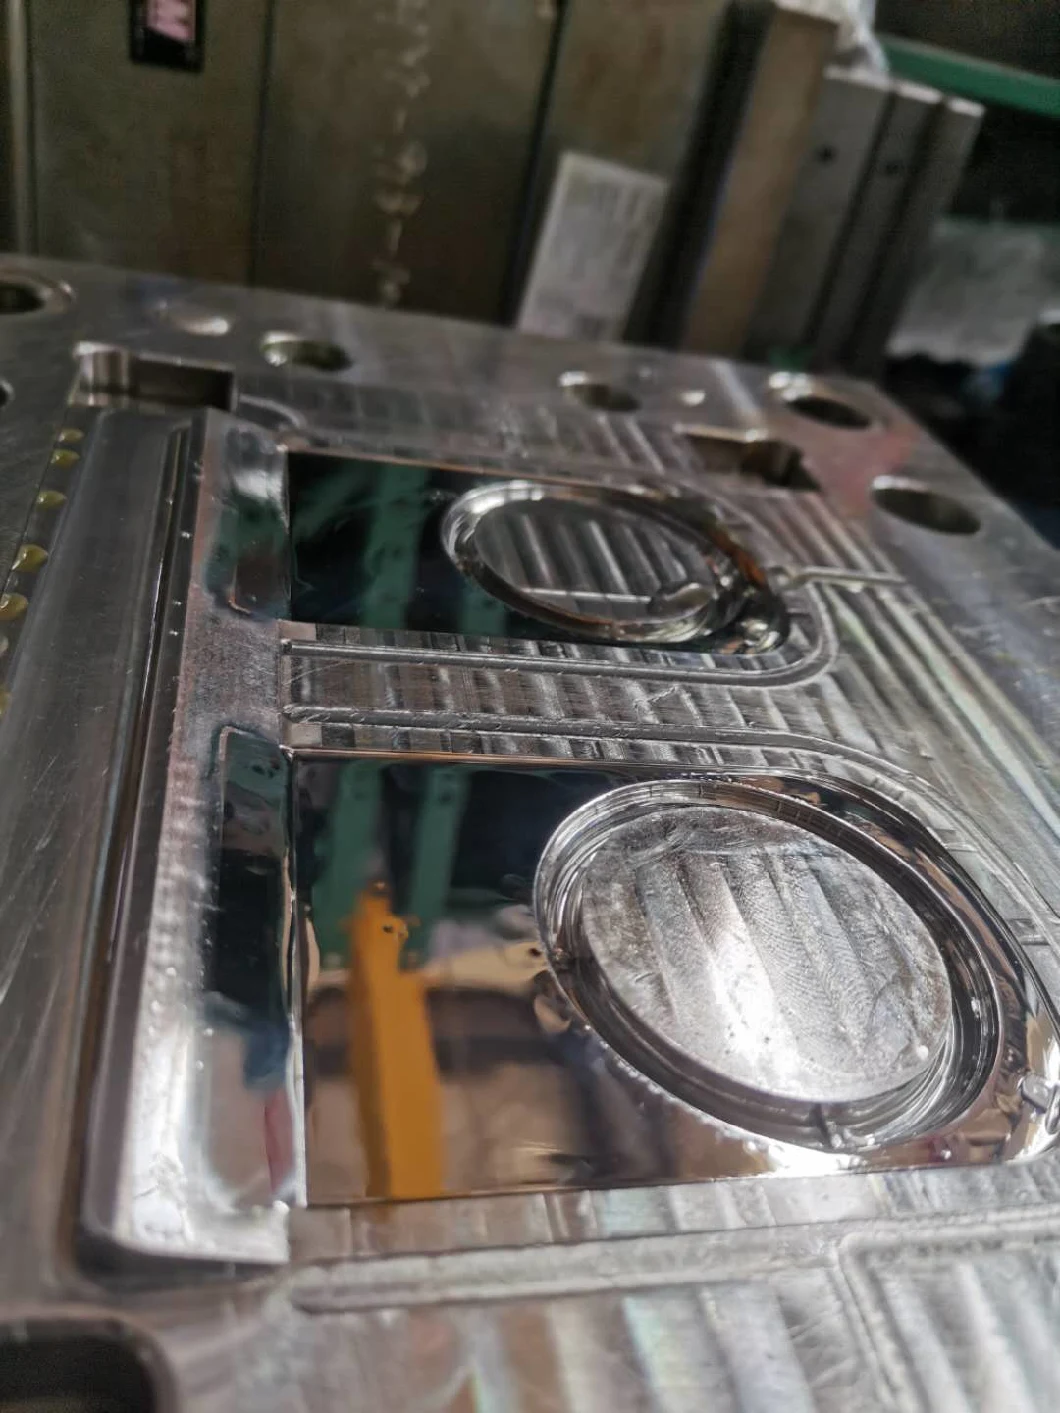 Transparent Mould OEM Plastic Injection Mould for Electronic Parts/ Medical Parts/Daily Use Products/ Plastic Cover/ Plastic Shell/ Plastic Flower Pot